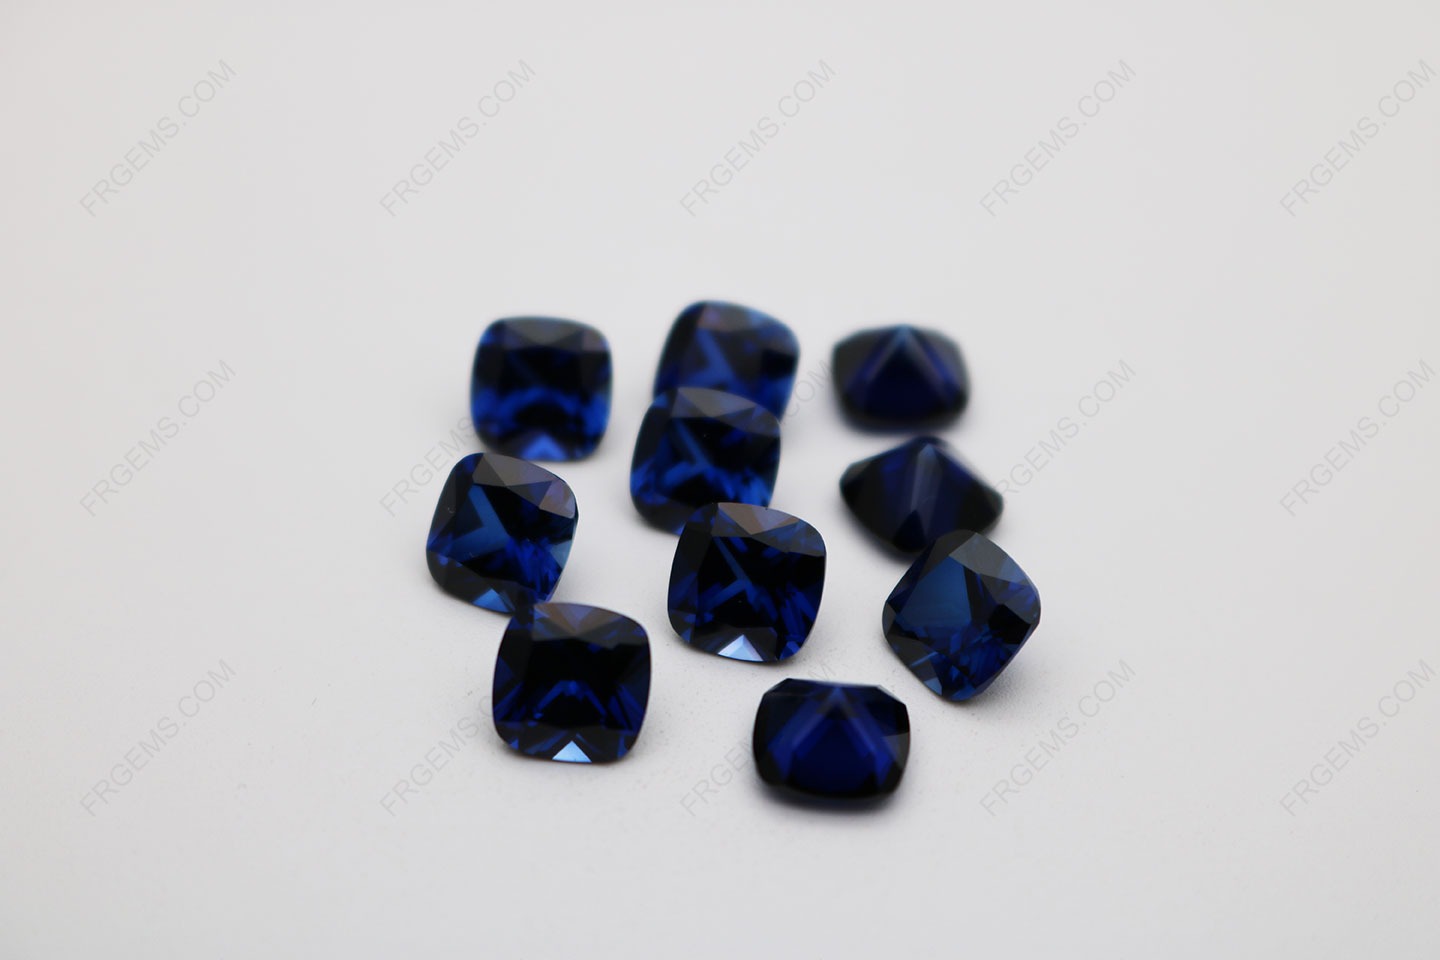 Loose Synthetic Corundum Blue Sapphire 34# Cushion Shape Faceted Cut 8x8mm stones IMG_0932